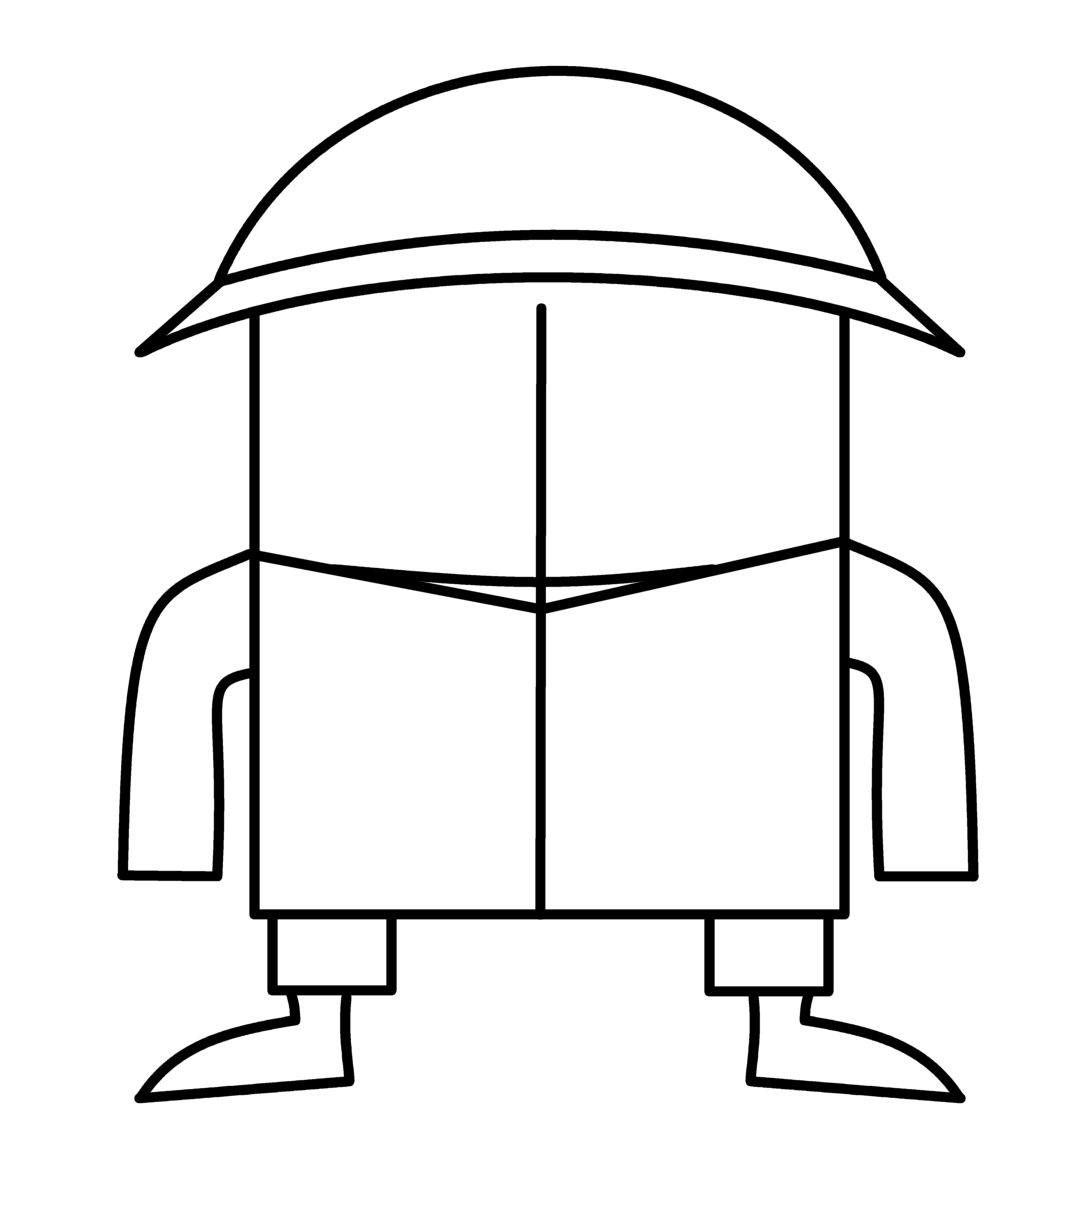 How To Draw Cartoons: Chibi Soldier